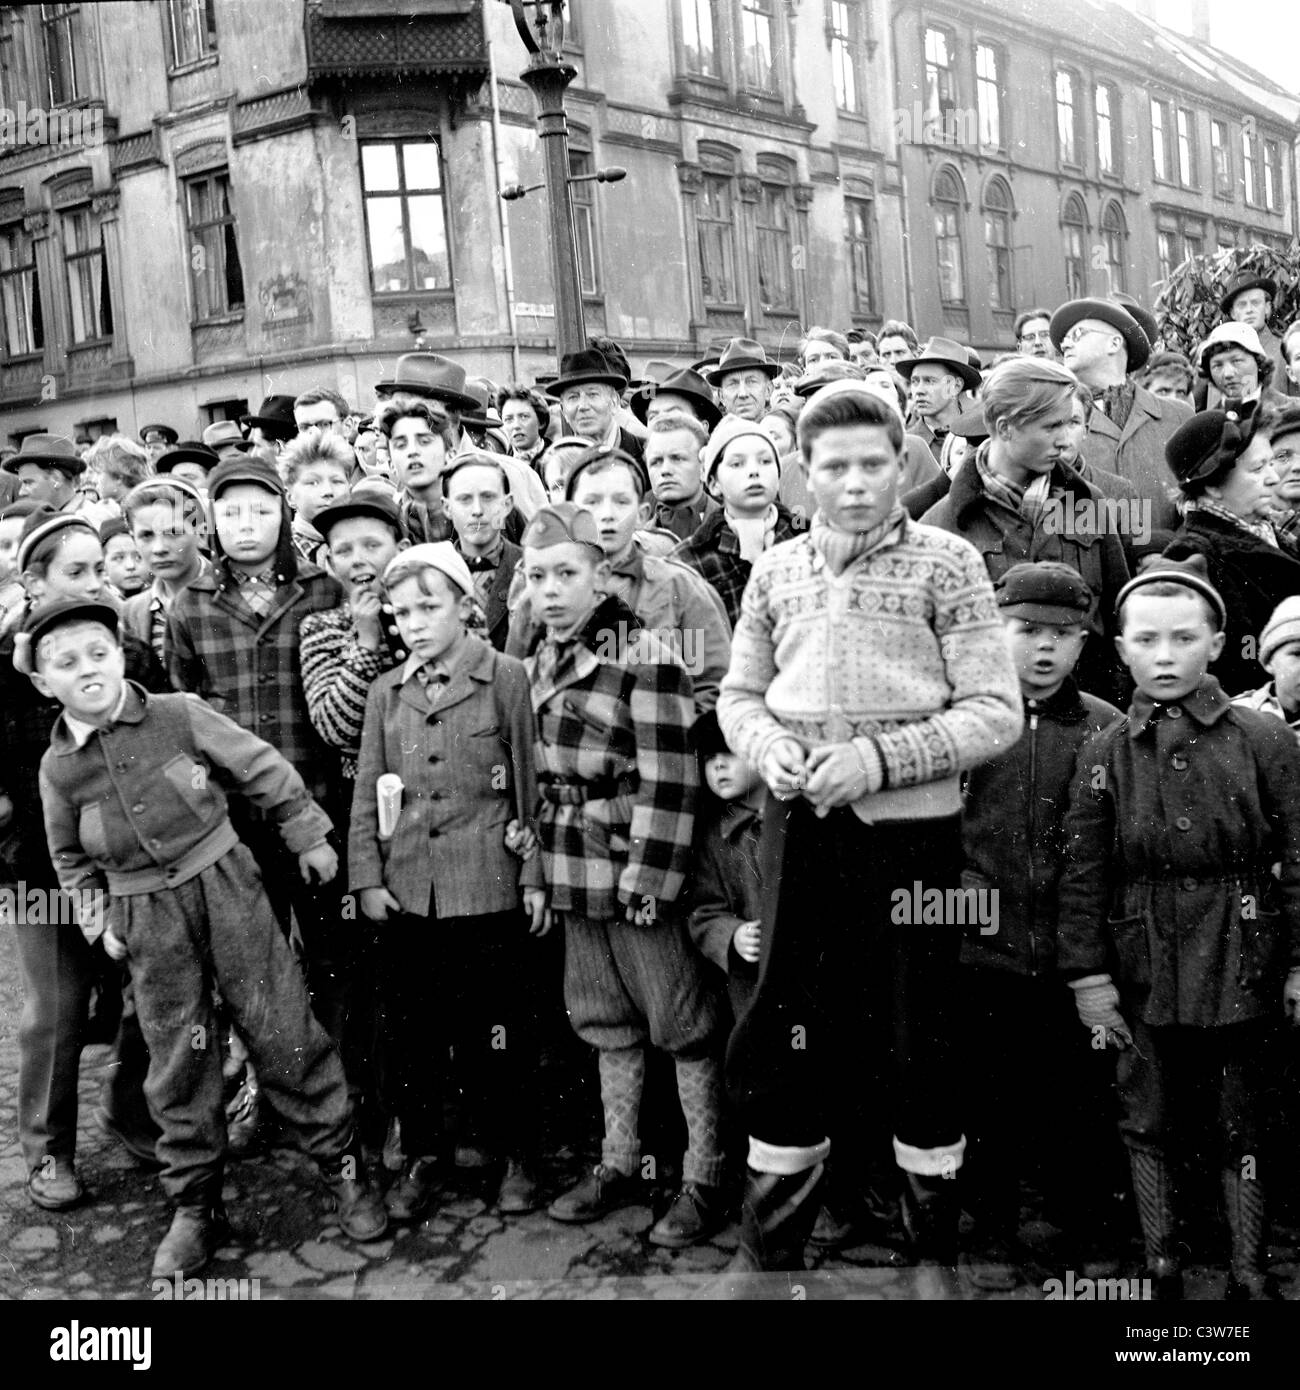 1950s. An historical picture from J Allan Cash of people including children at the front, waiting in a street, Bergen, Norway. Stock Photo